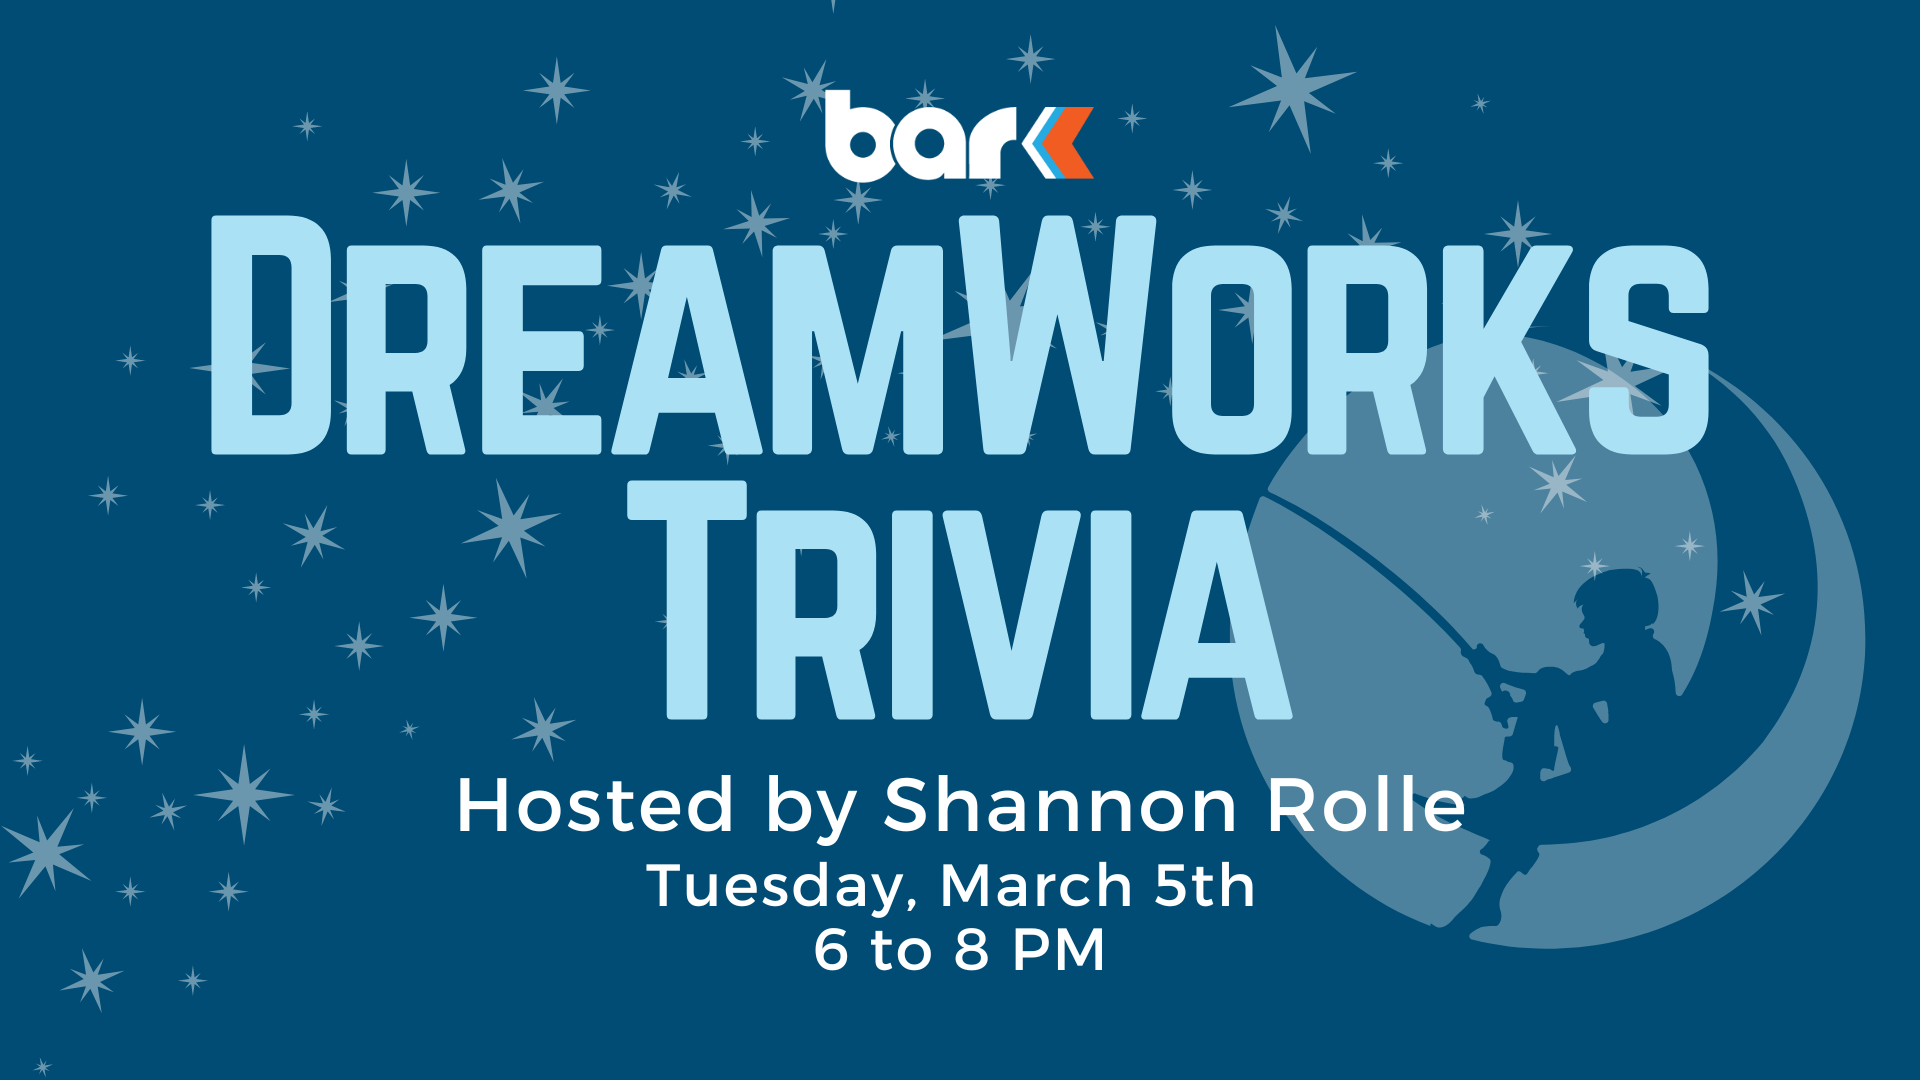 Dreamworks trivia hosted by Shannon Rolle at Bar K. Tuesday, March 5th from 6 to 8 pm.